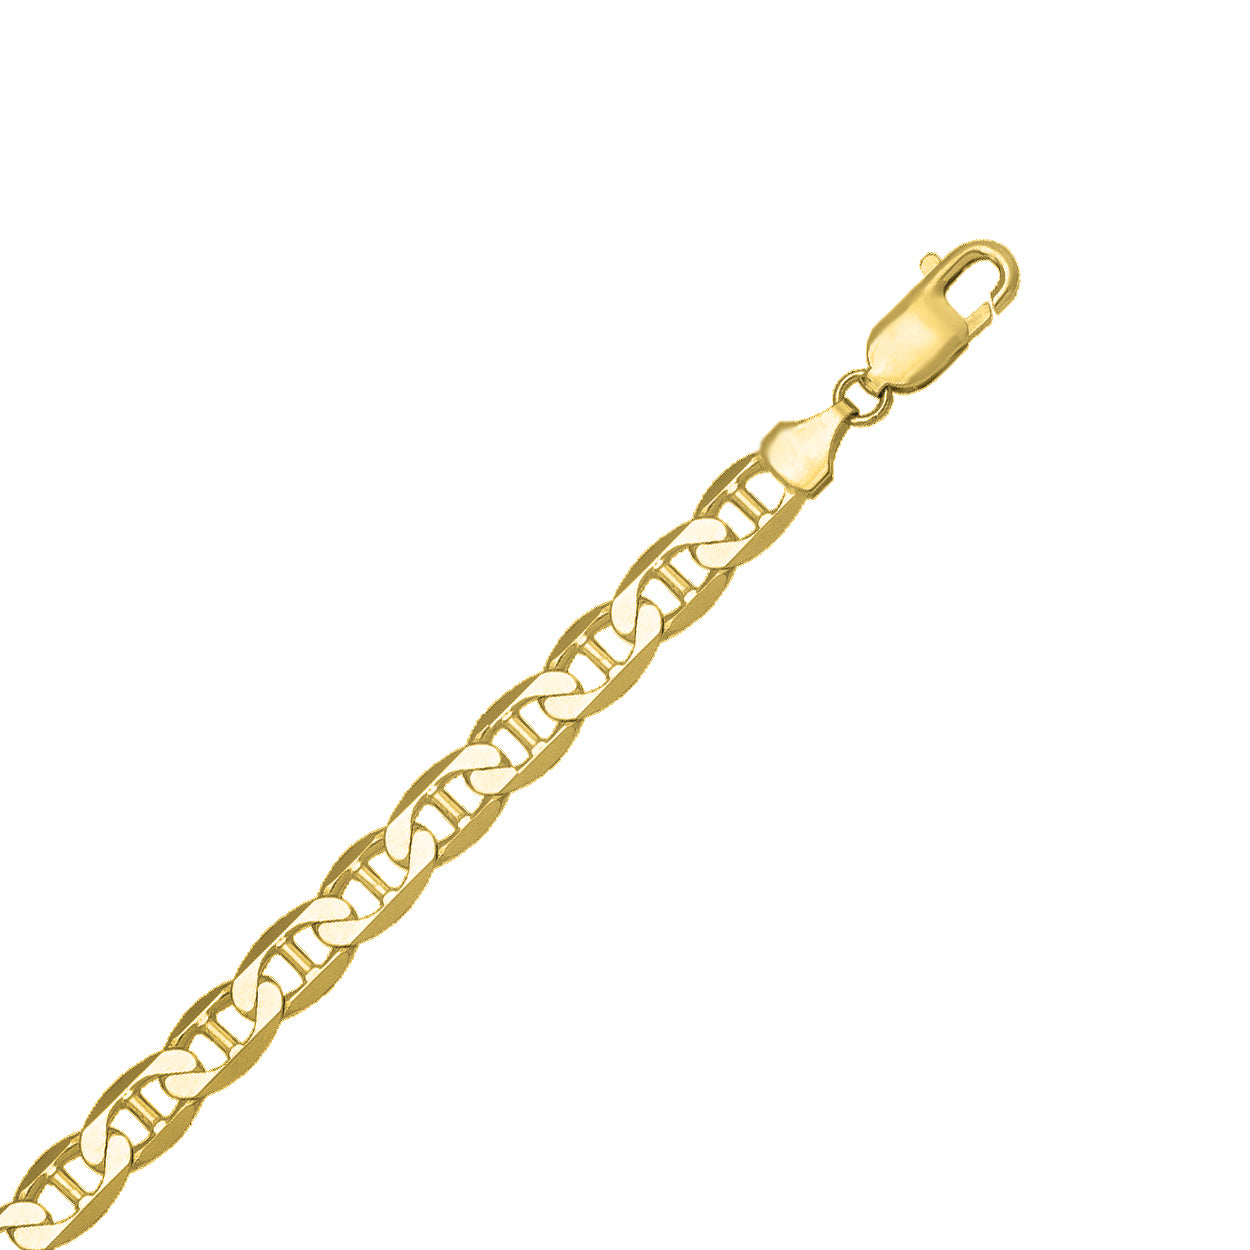 18kt Yellow Gold Marine Style Bracelet with 7mm Width